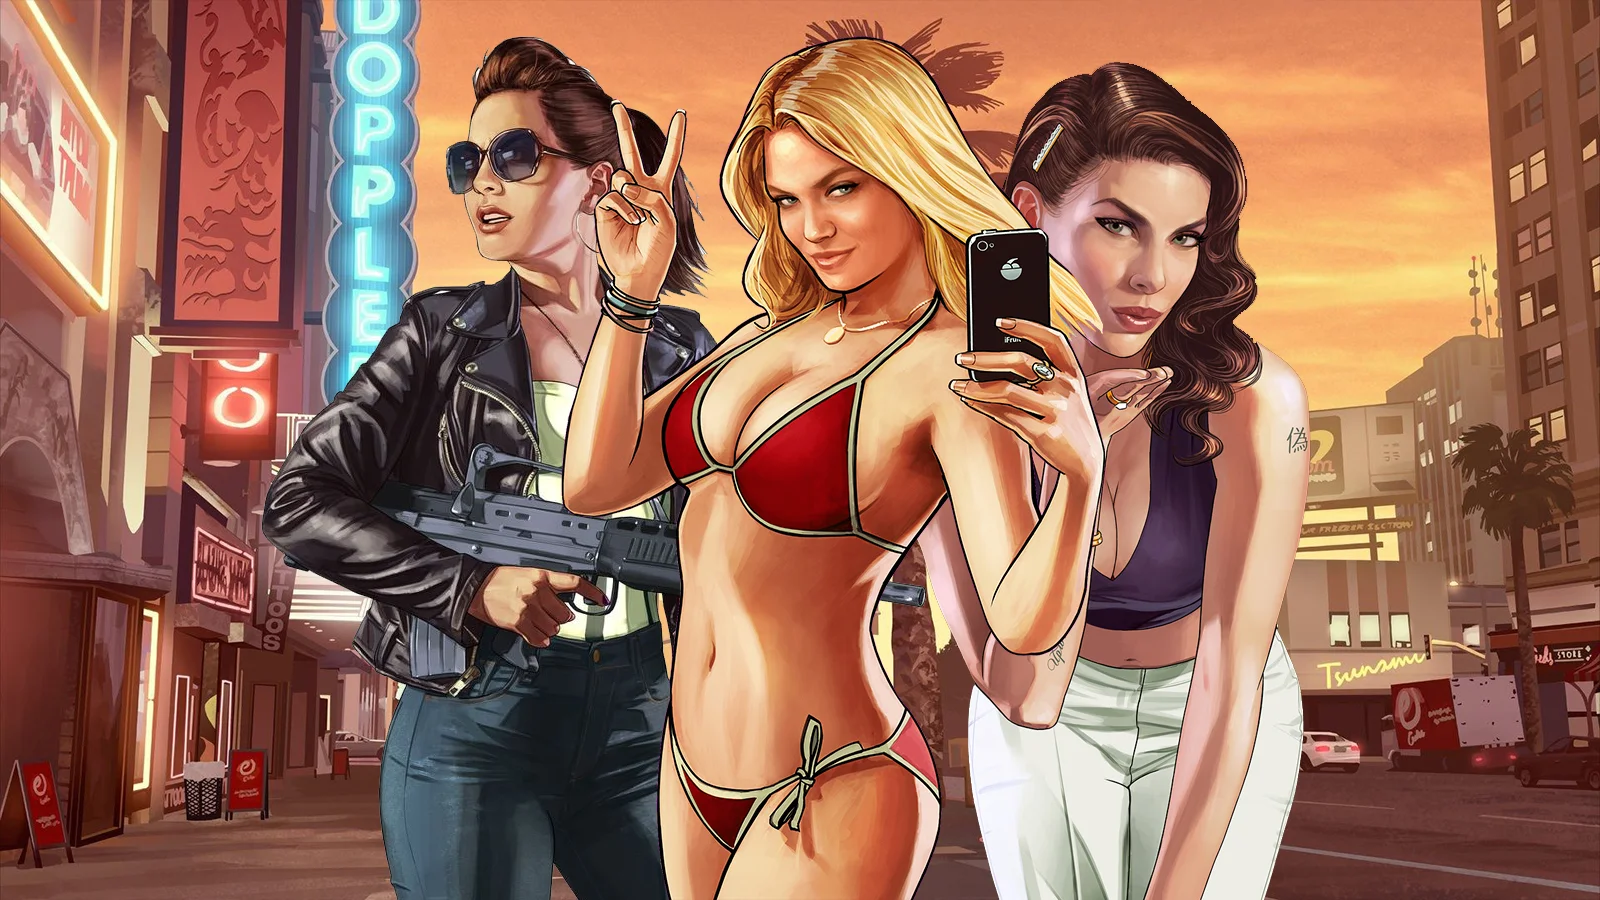 Another insider reported the supposedly exact release date of the GTA 6 trailer